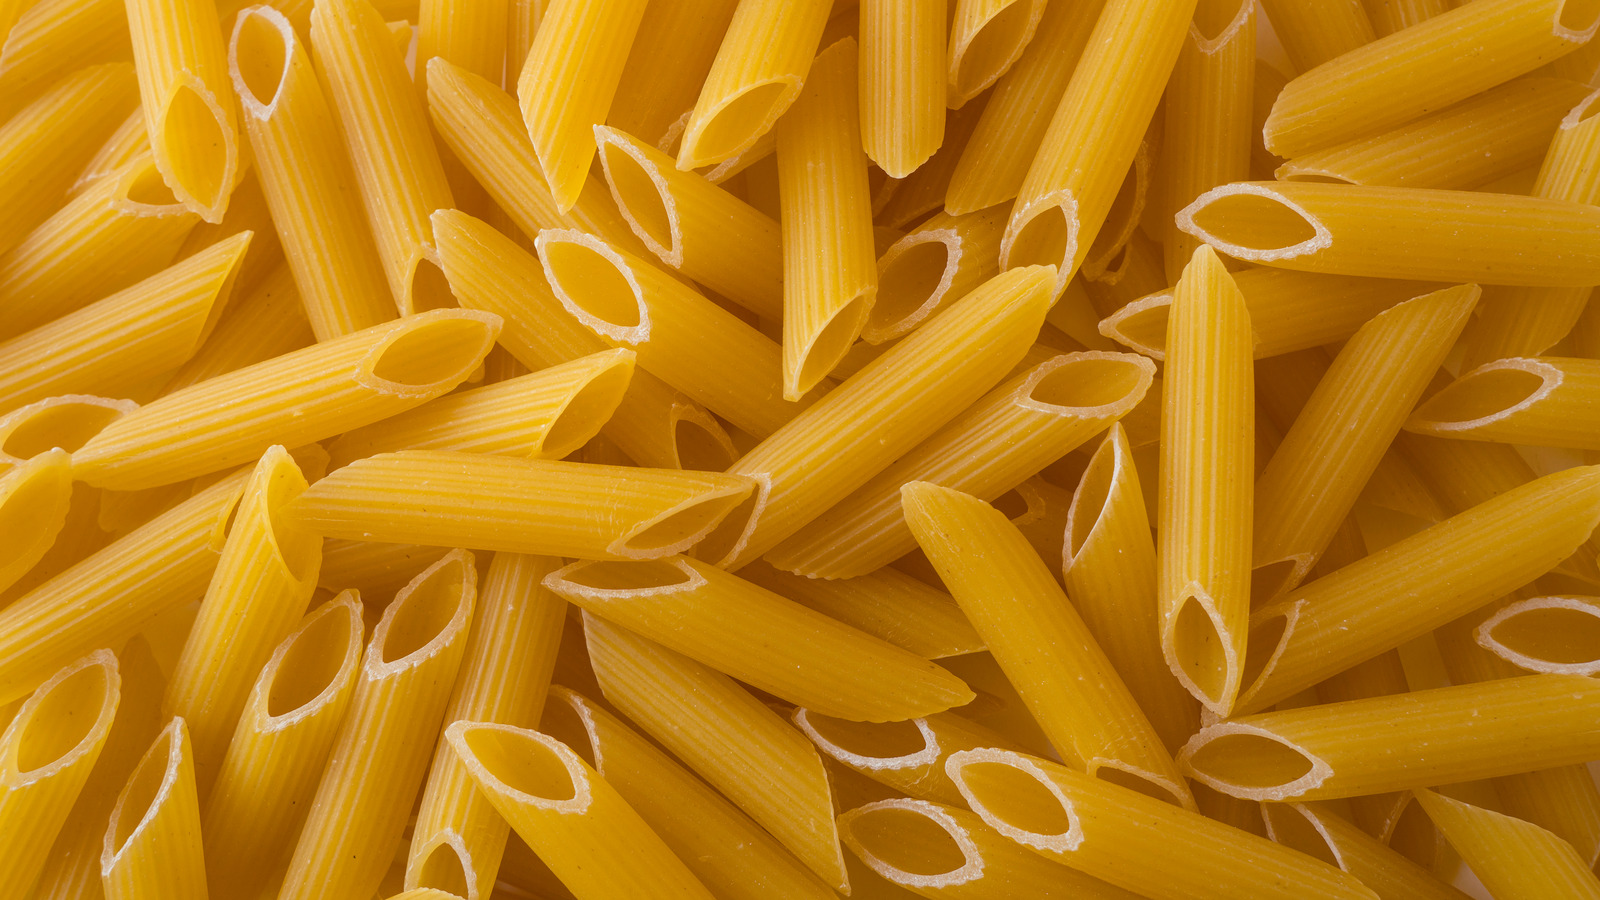 Barilla - Discover & Try Barilla's Gluten Free ( Spaghetti, Penne Rigate &  Fusilli), Italy's most popular pasta, with no wheat ingredients. Serve up  with any sauce or pasta dish today!